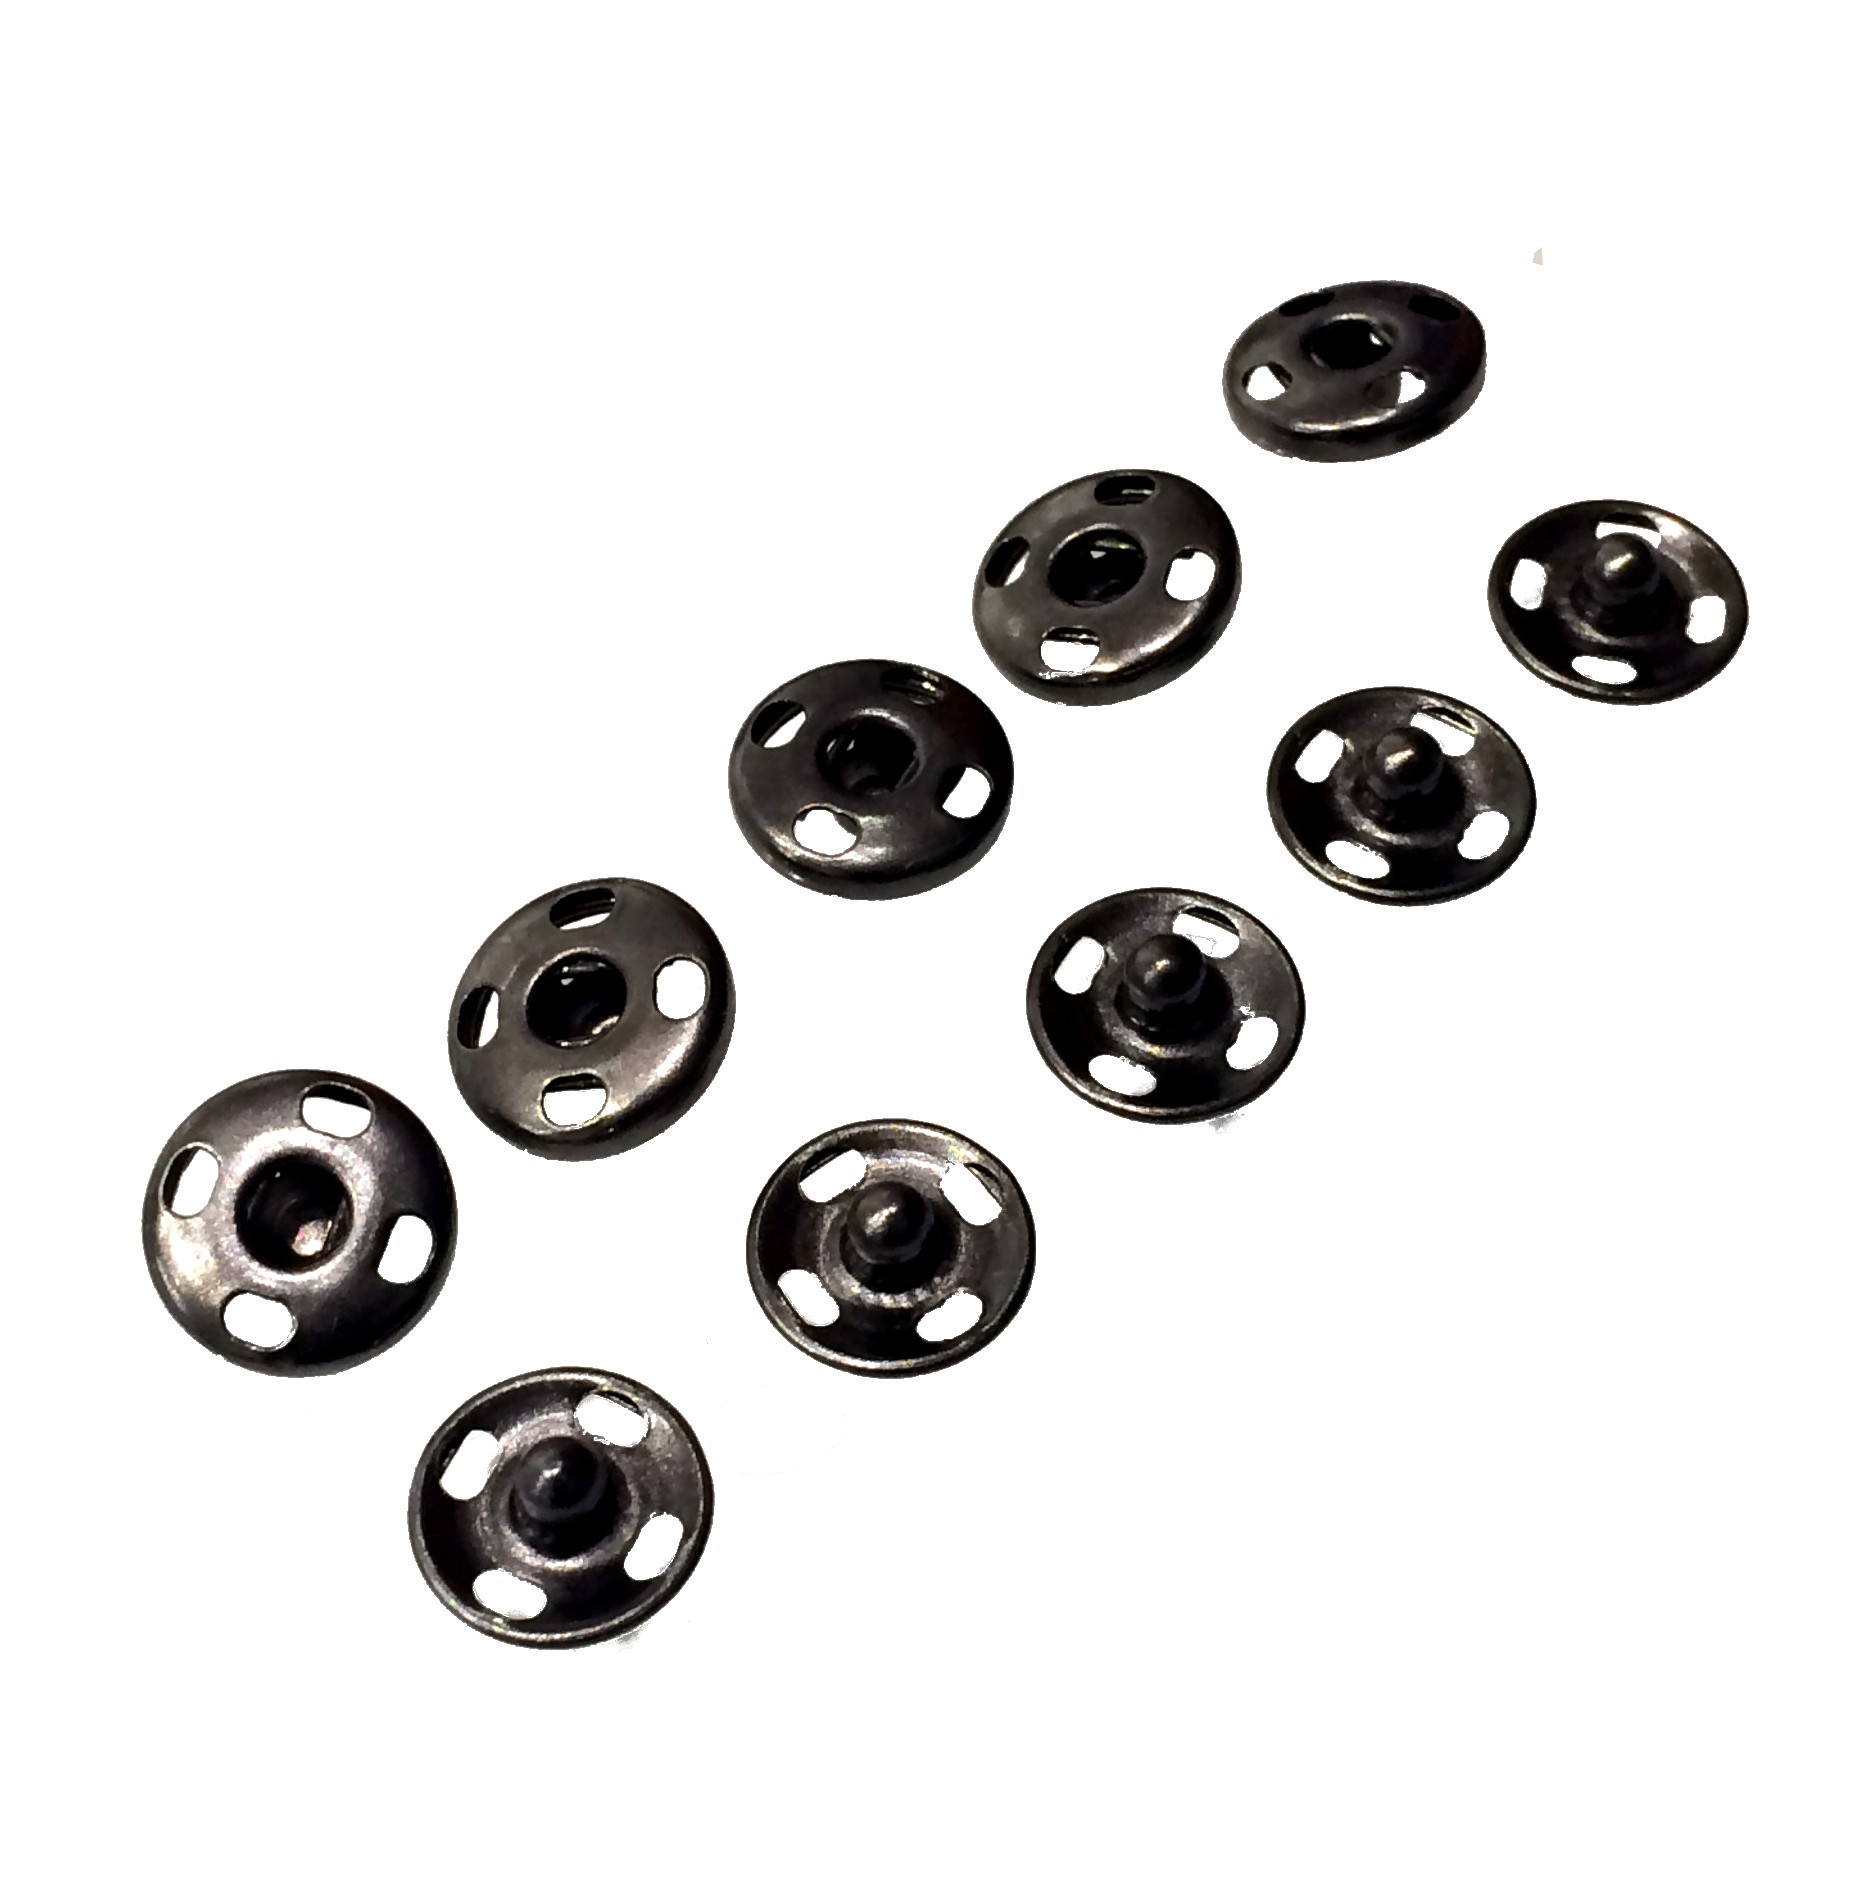 $2.49 - Sewable Metal Snap Buttons 5 pack - Tinkersphere